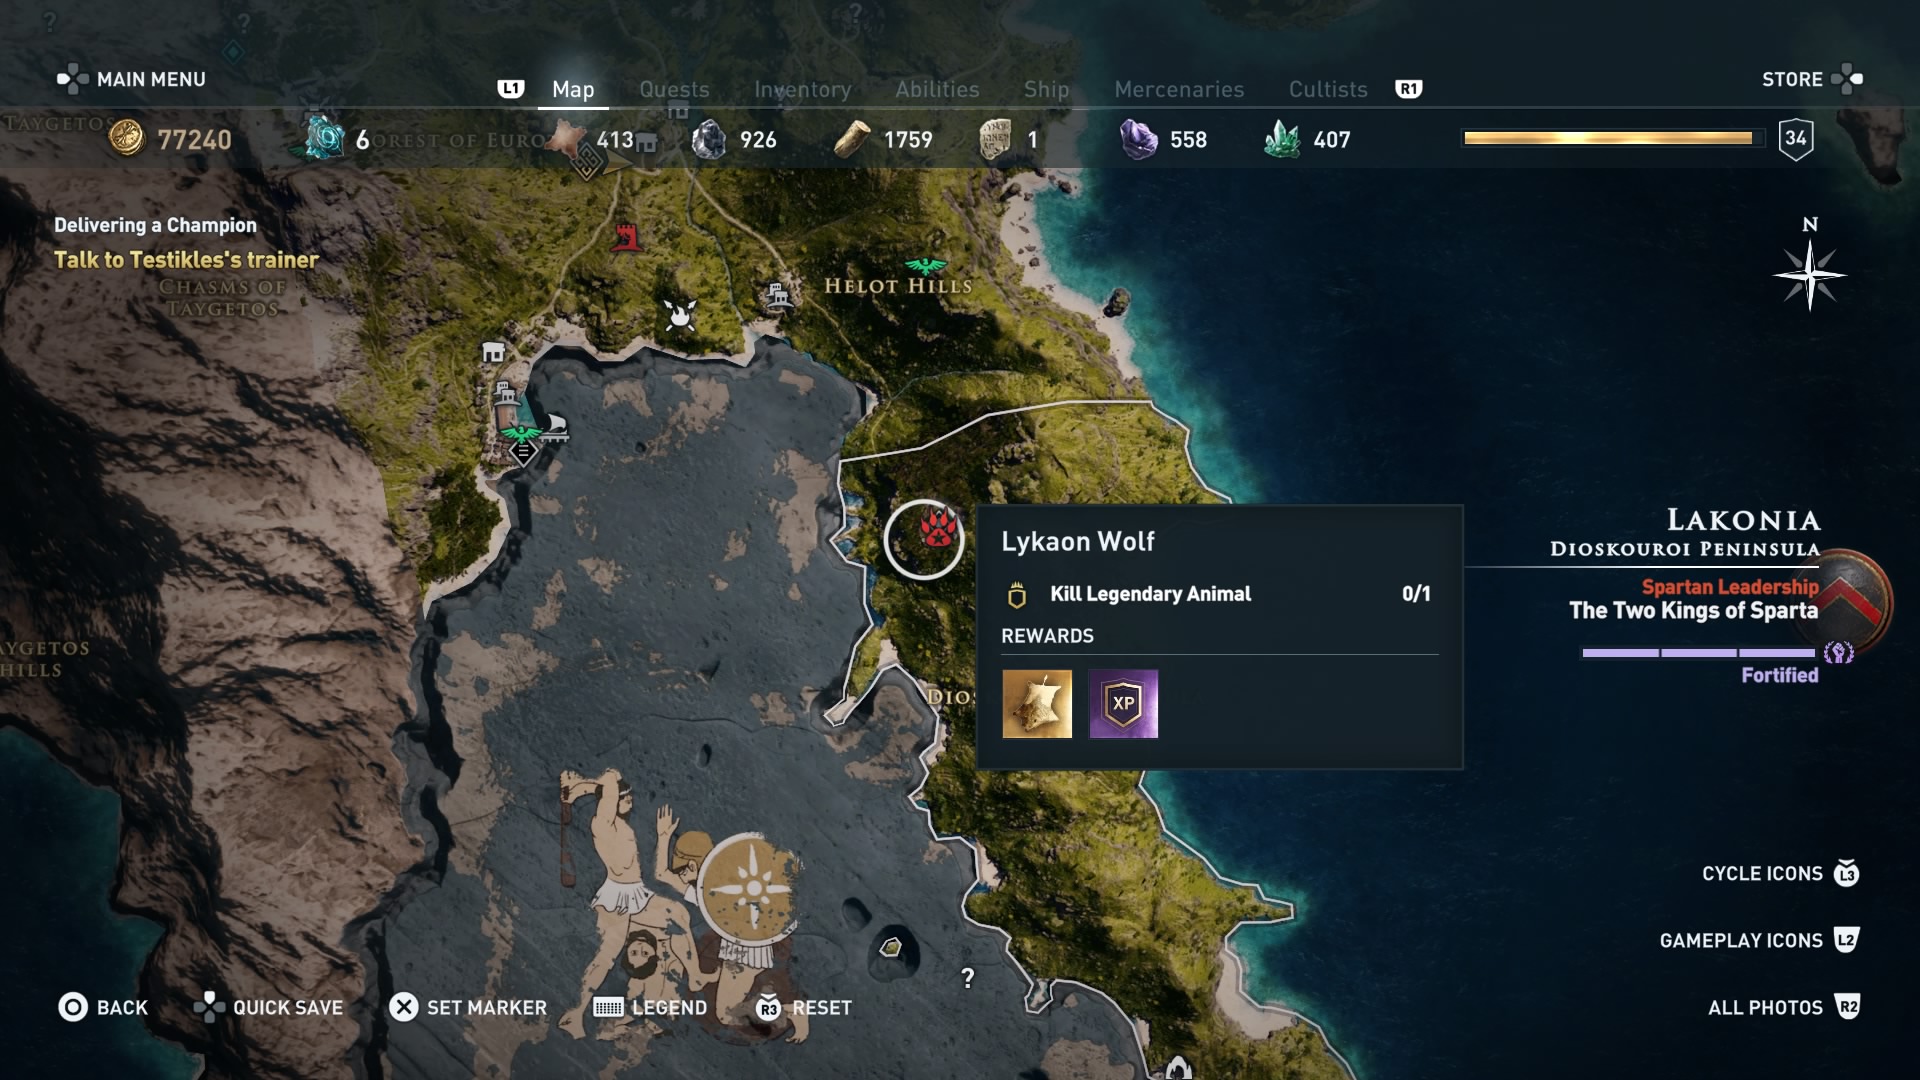 Assassin's Creed Odyssey: The Lykaon Wolf location